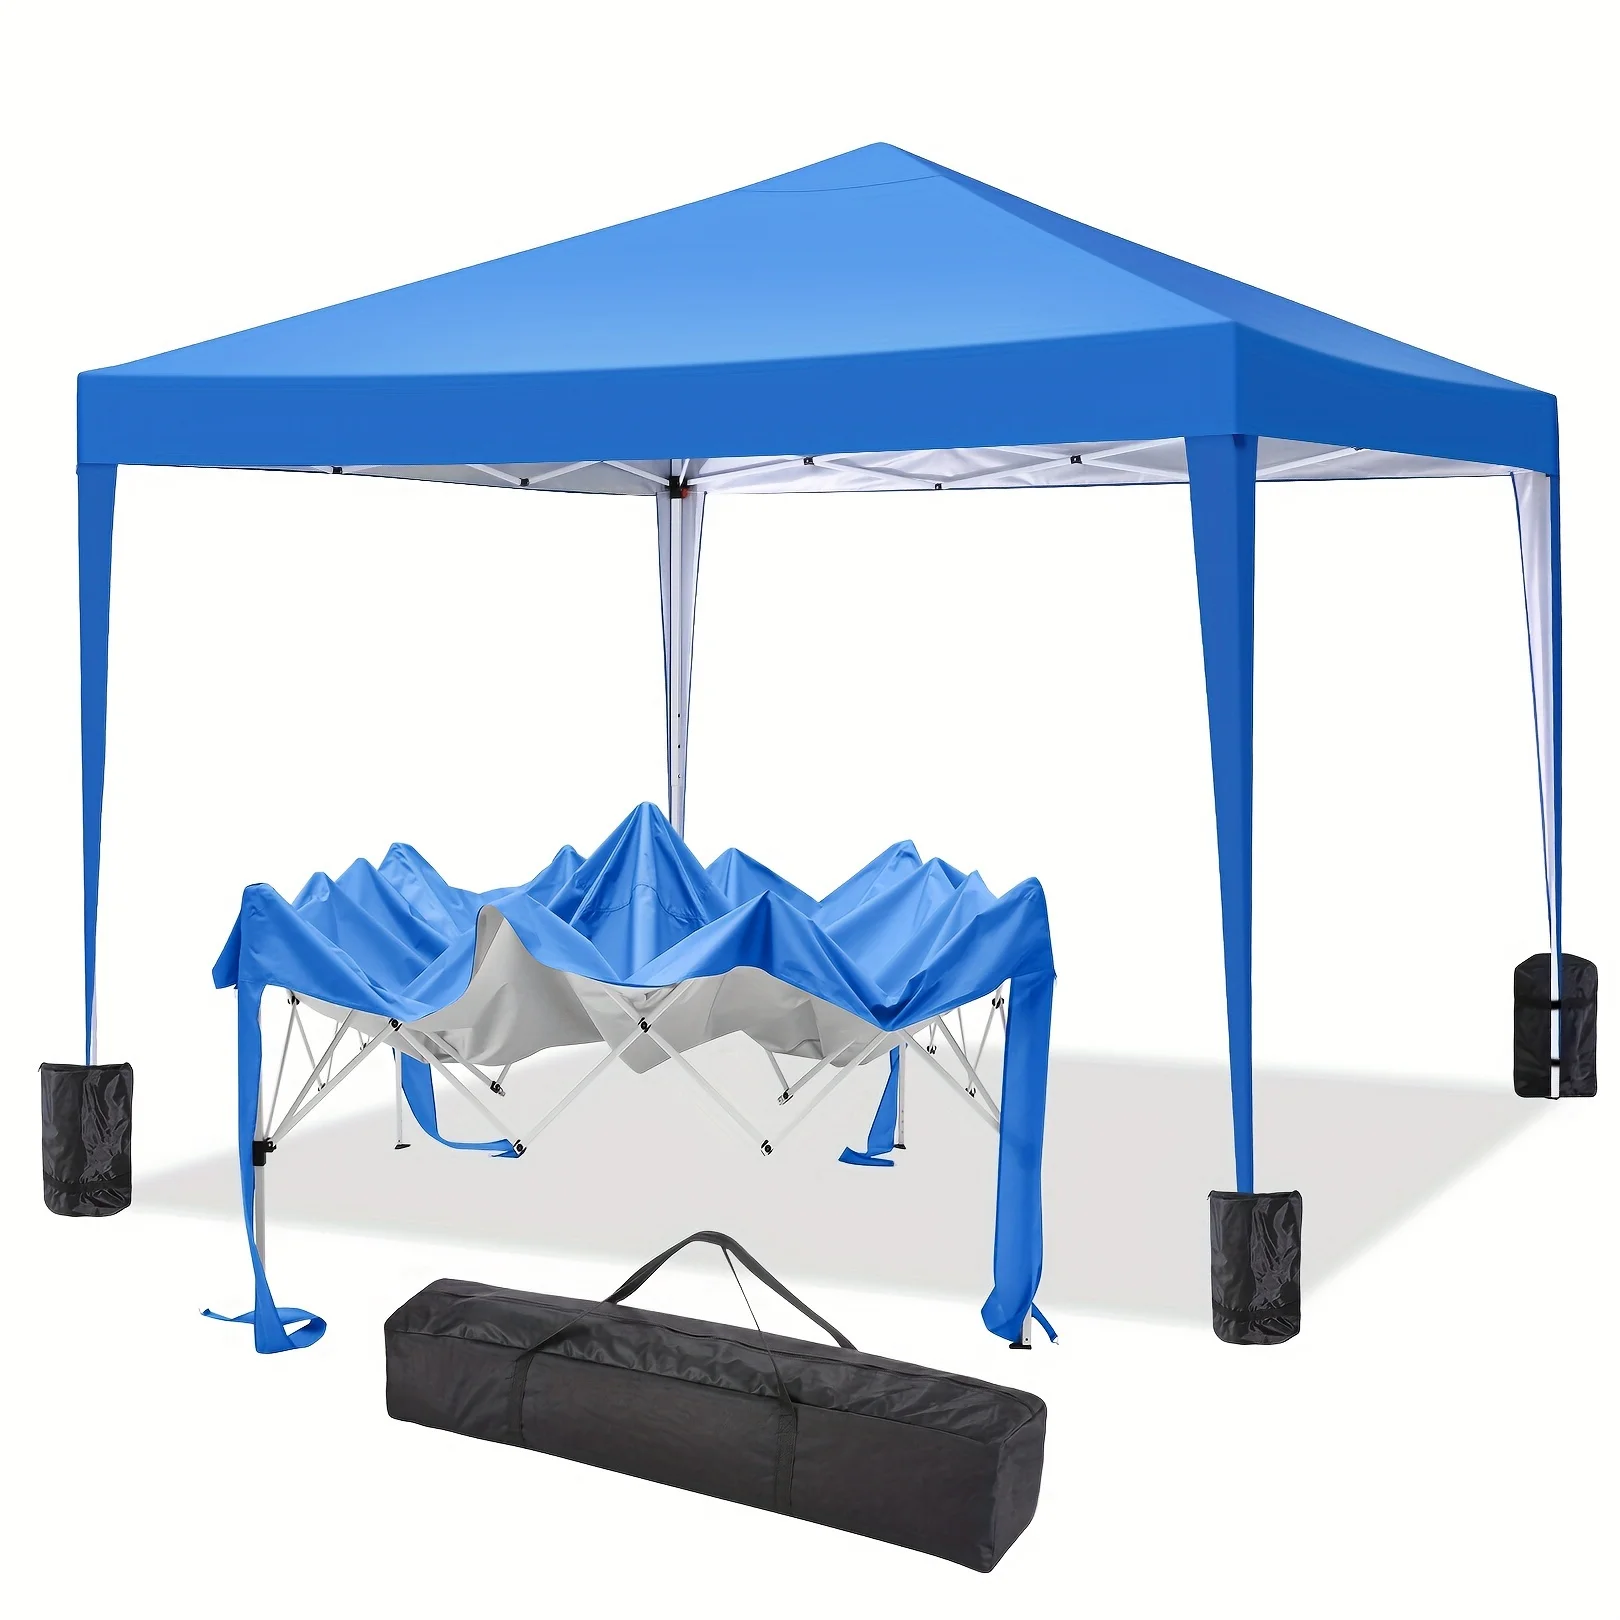 

Pop-Up Canopy Tent, Waterproof Outdoor Instant Shelter, Portable Gazebo For Camping, Commercial Sun Shade Party, Backyard, With